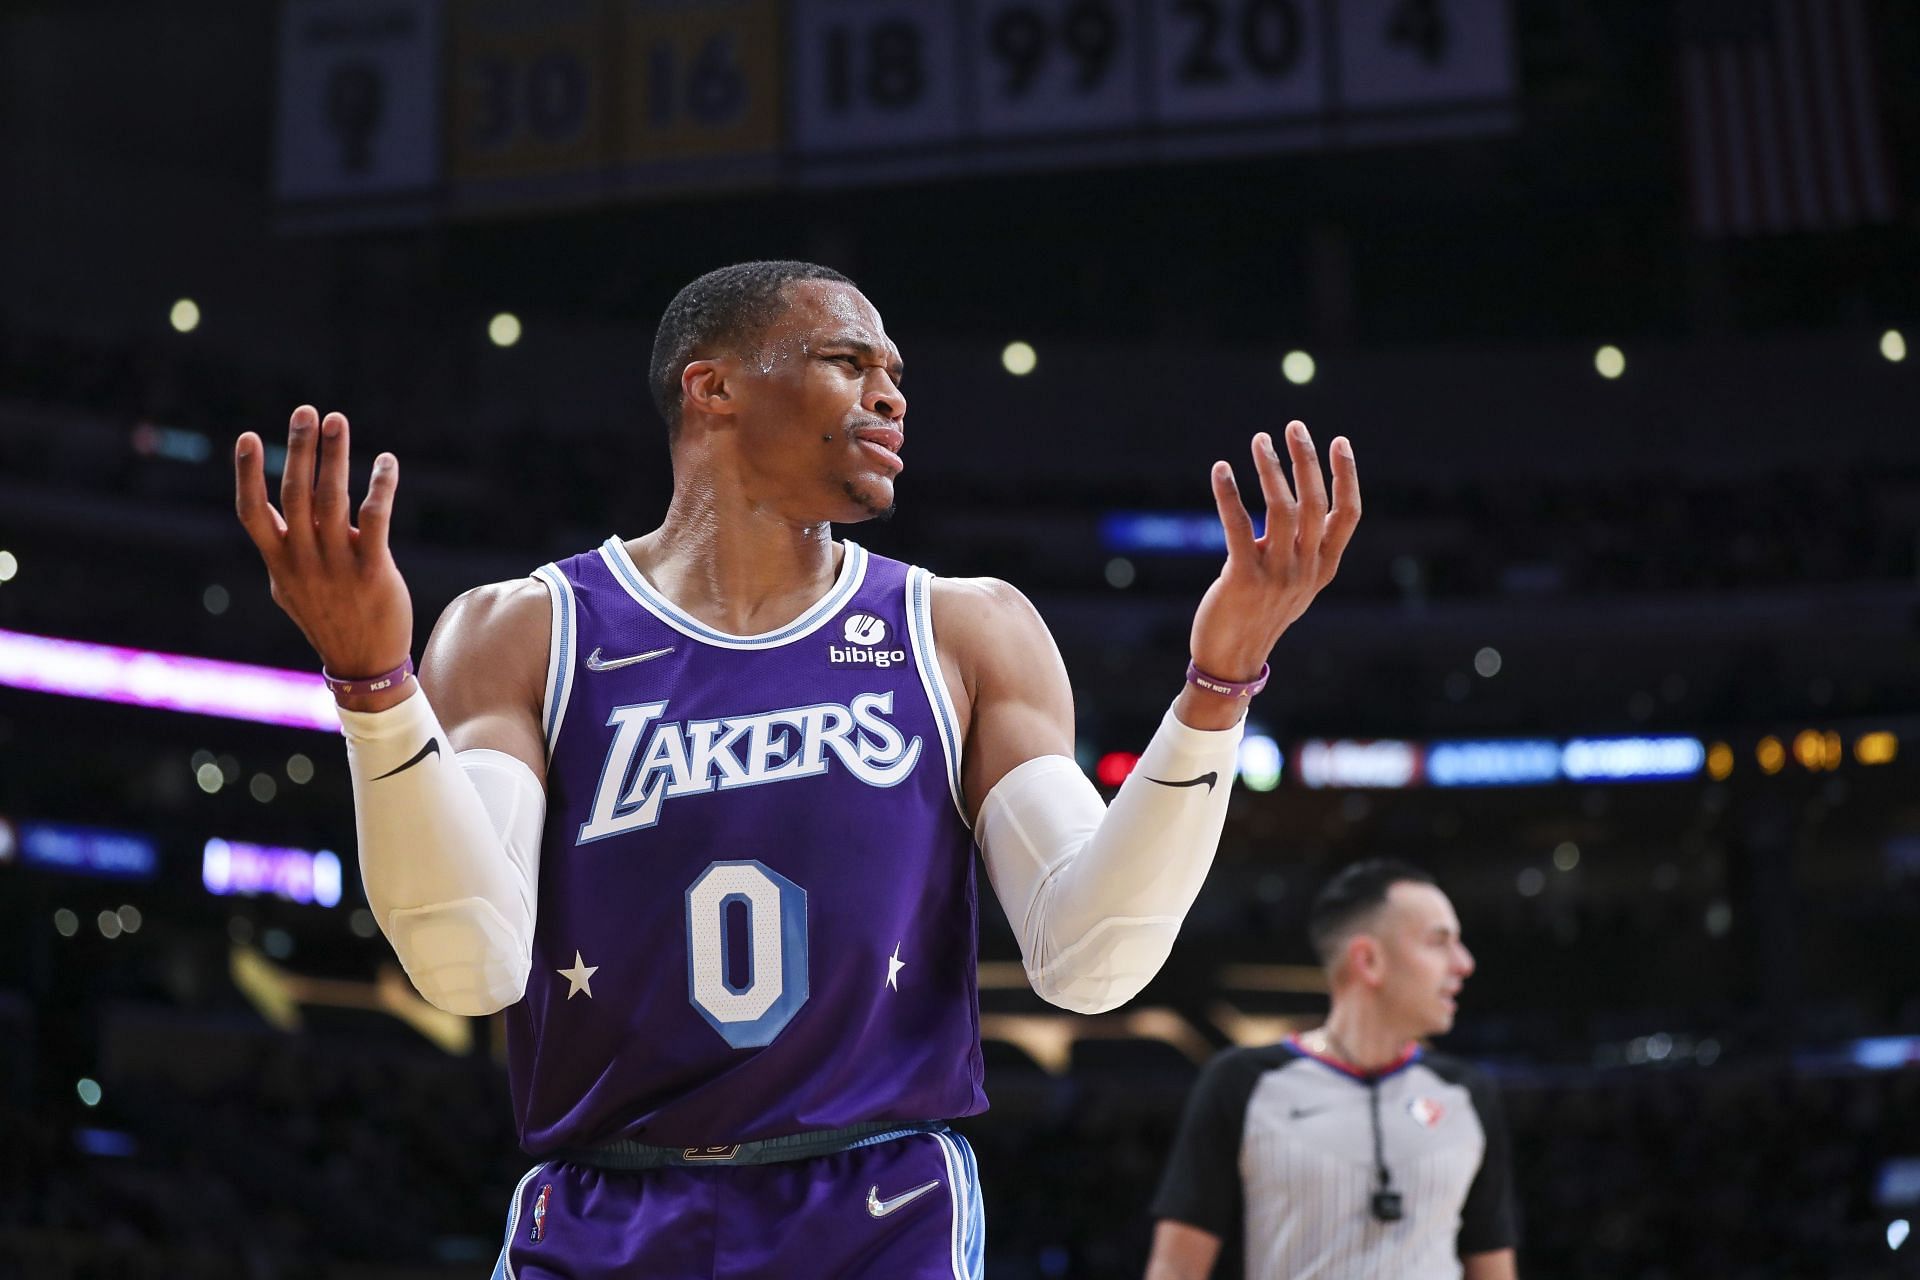 Los Angeles Lakers guard Russell Westbrook reacting to a call in the second quaerter.